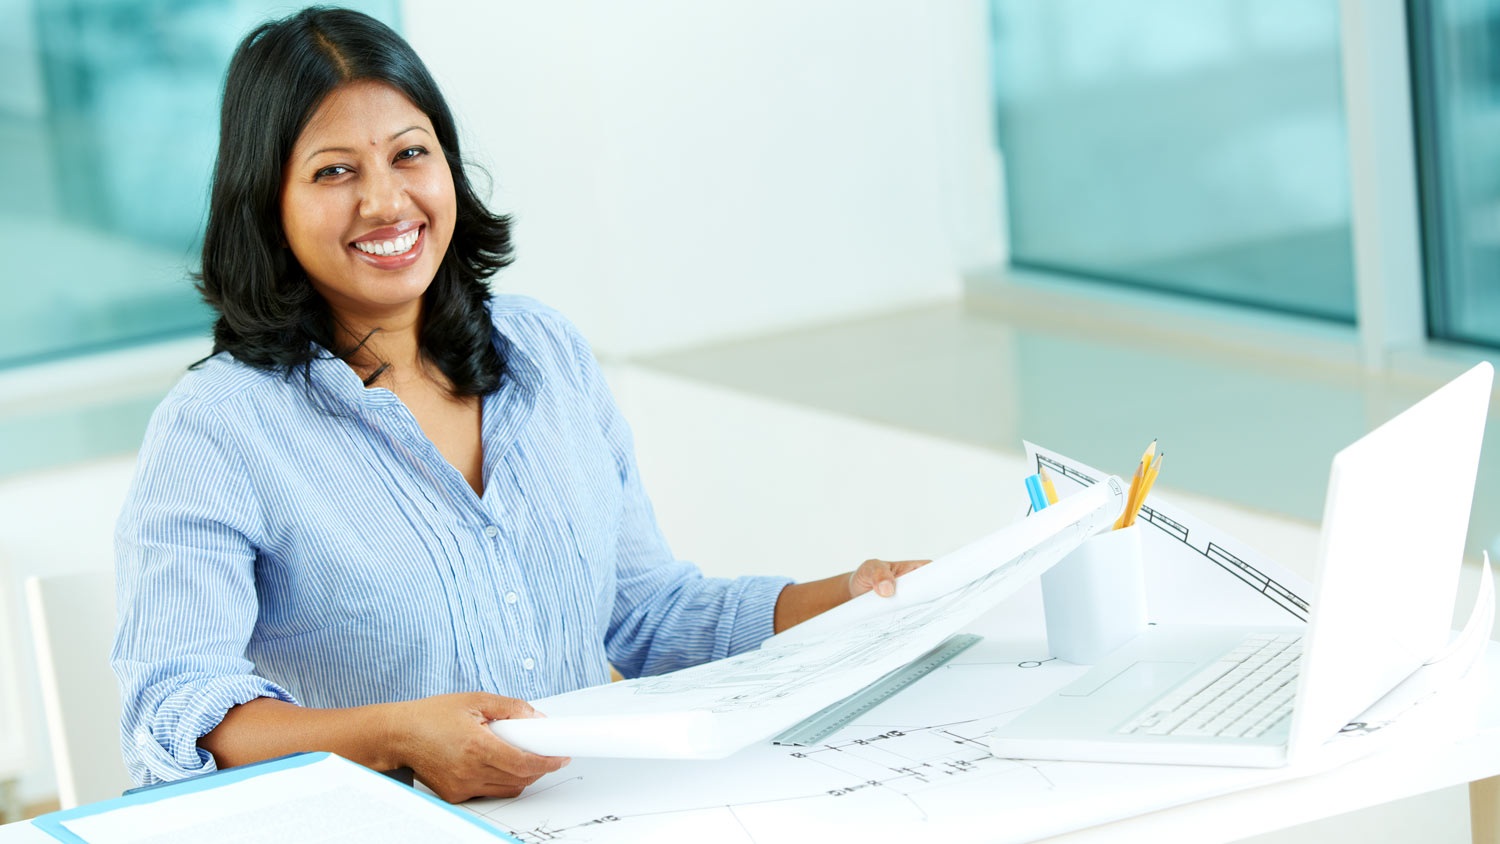 A woman smiles at the camera while holding architectural renderings